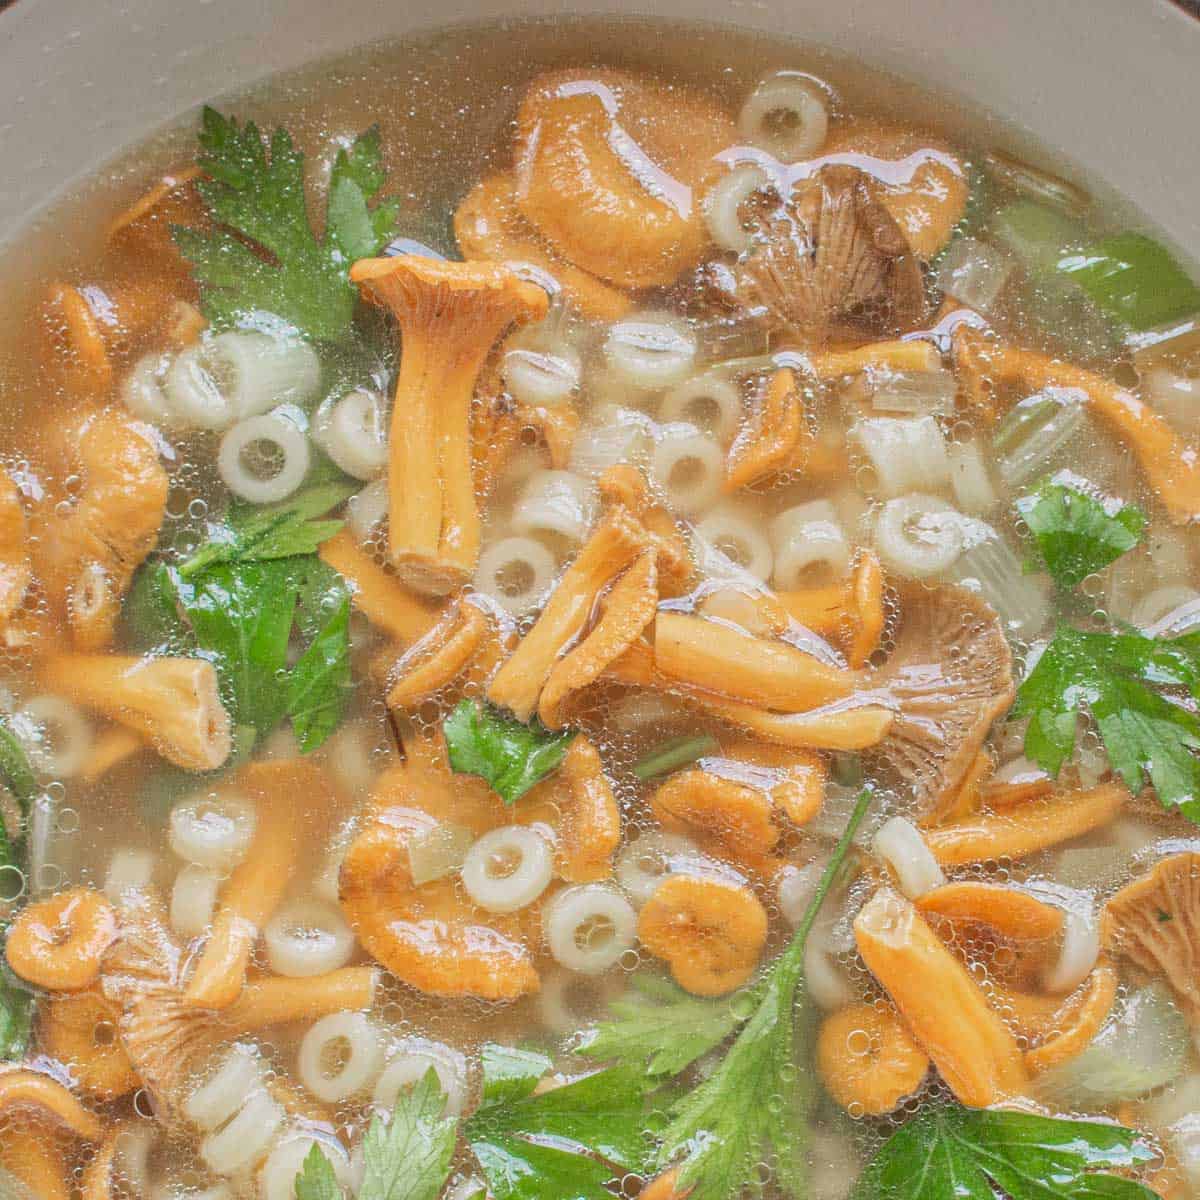 yellow mushrooms in a bowl of broth with herbs and pasta rings 